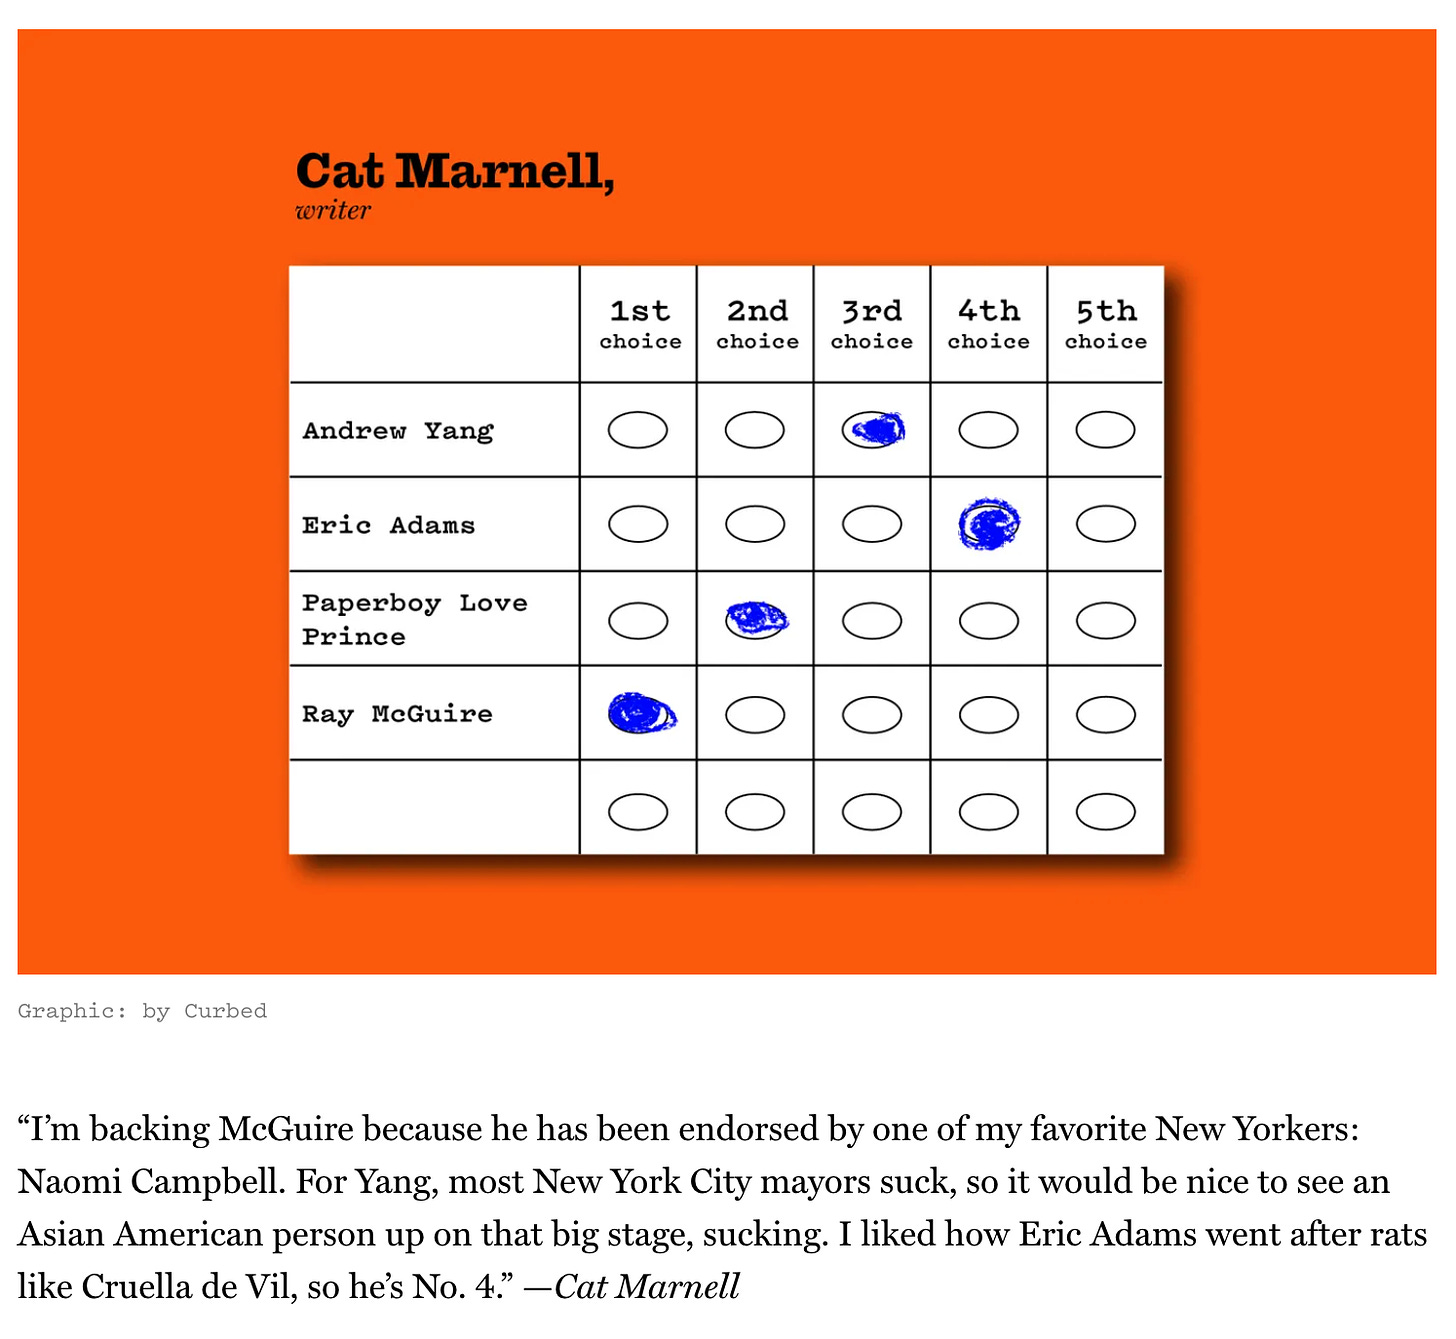 Screenshot from Curbed showing a picture of Cat Marnell's ballot choices ranked, with the text: "“I’m backing McGuire because he has been endorsed by one of my favorite New Yorkers: Naomi Campbell. For Yang, most New York City mayors suck, so it would be nice to see an Asian American person up on that big stage, sucking. I liked how Eric Adams went after rats like Cruella de Vil, so he’s No. 4.” —Cat Marnell"